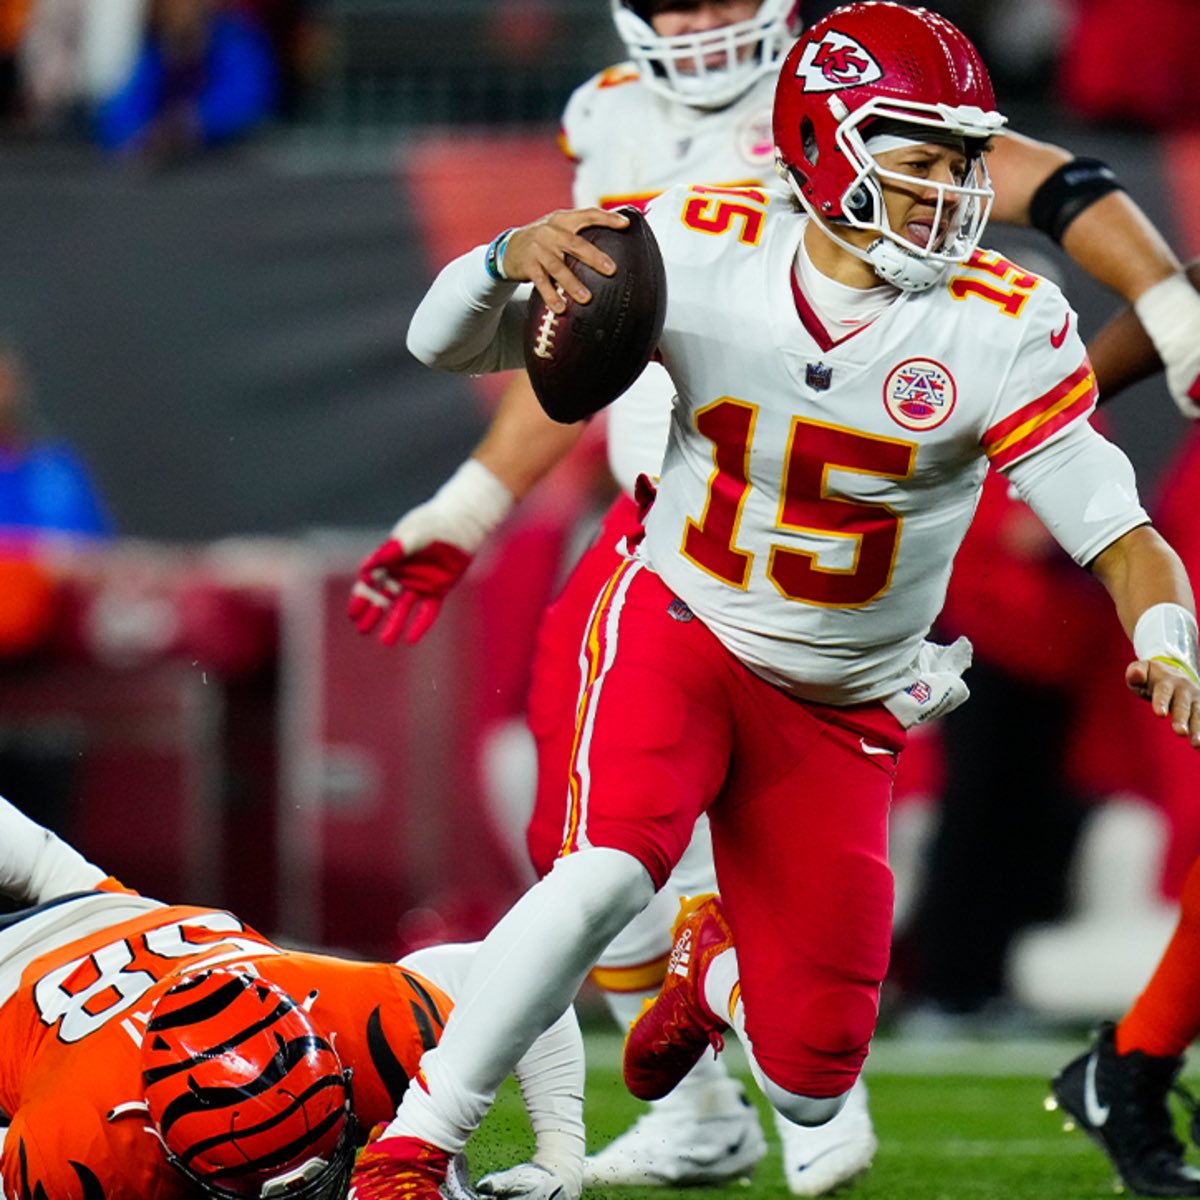 🚨🚨#NFL Freeplay🚨🚨

#Chiefs vs #Bengals u48 -110 [to win 2u]

#Freeplay Record: 82-59 +36.9u📈

Enough of this #Burrowhead crap. His banged up OL will struggle against the pass rush today. Also think Bengals TTu23.5 might be worth a play.  #GamblingTwitter #ChampionshipWeekend